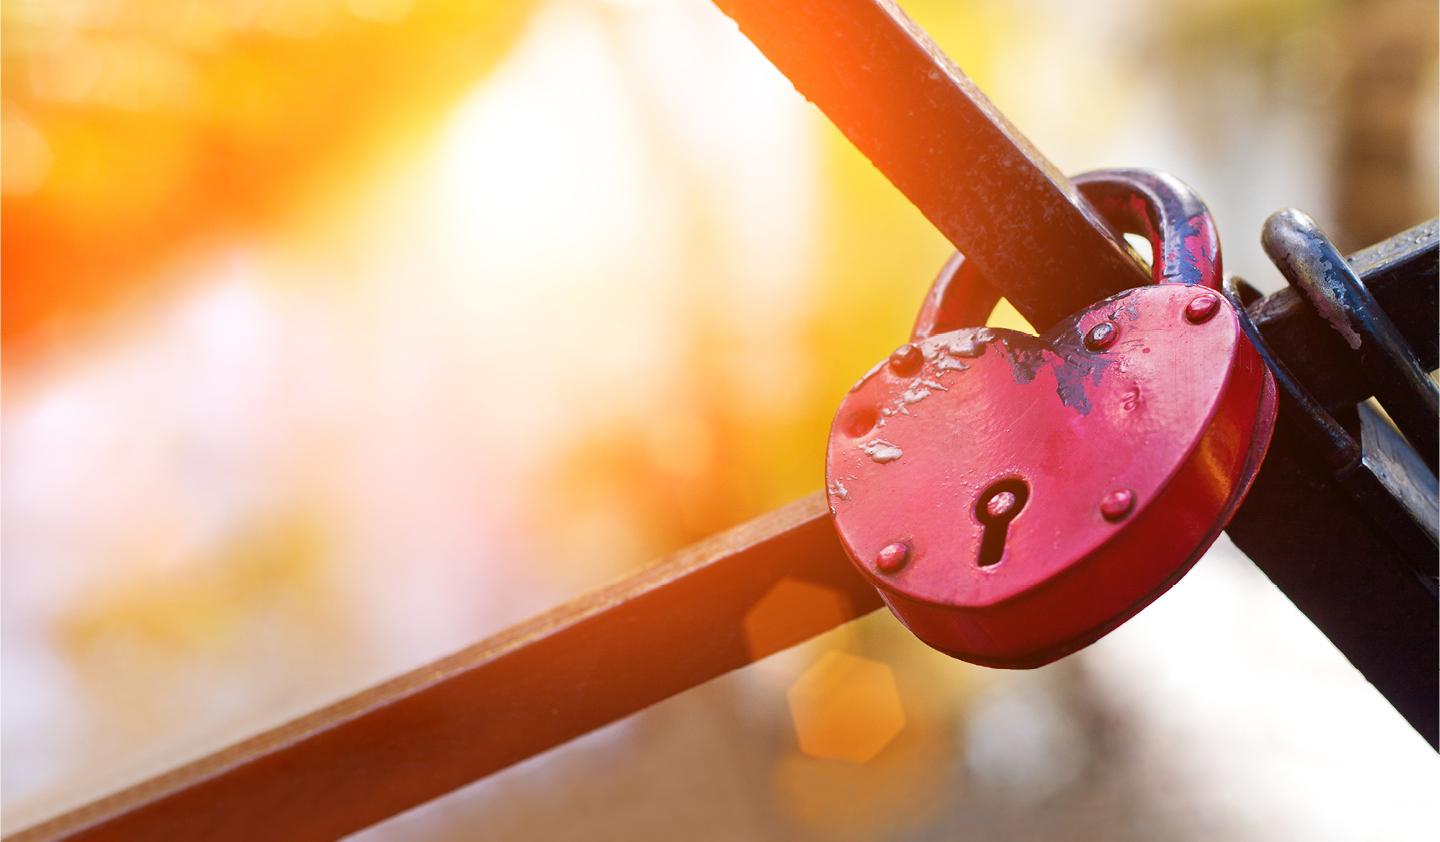 Lock shaped like heart with intersecting bars